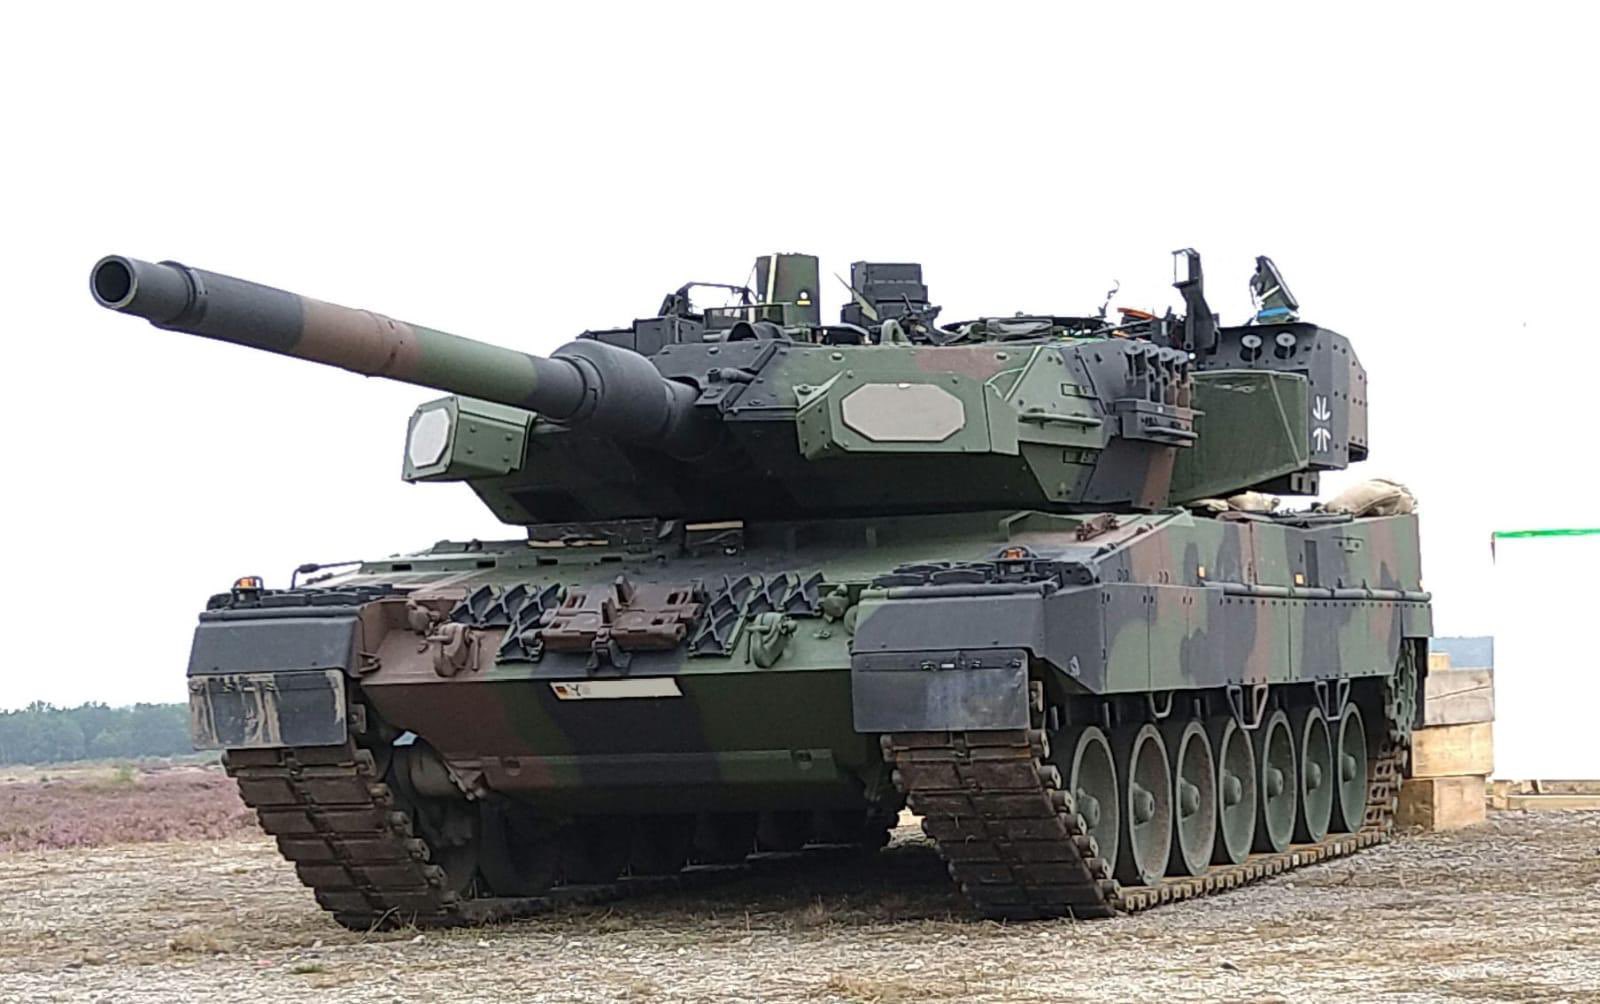 Rafael TROPHY Active Protection System Successfully Tested on German Leopard 2A7 main battle tank